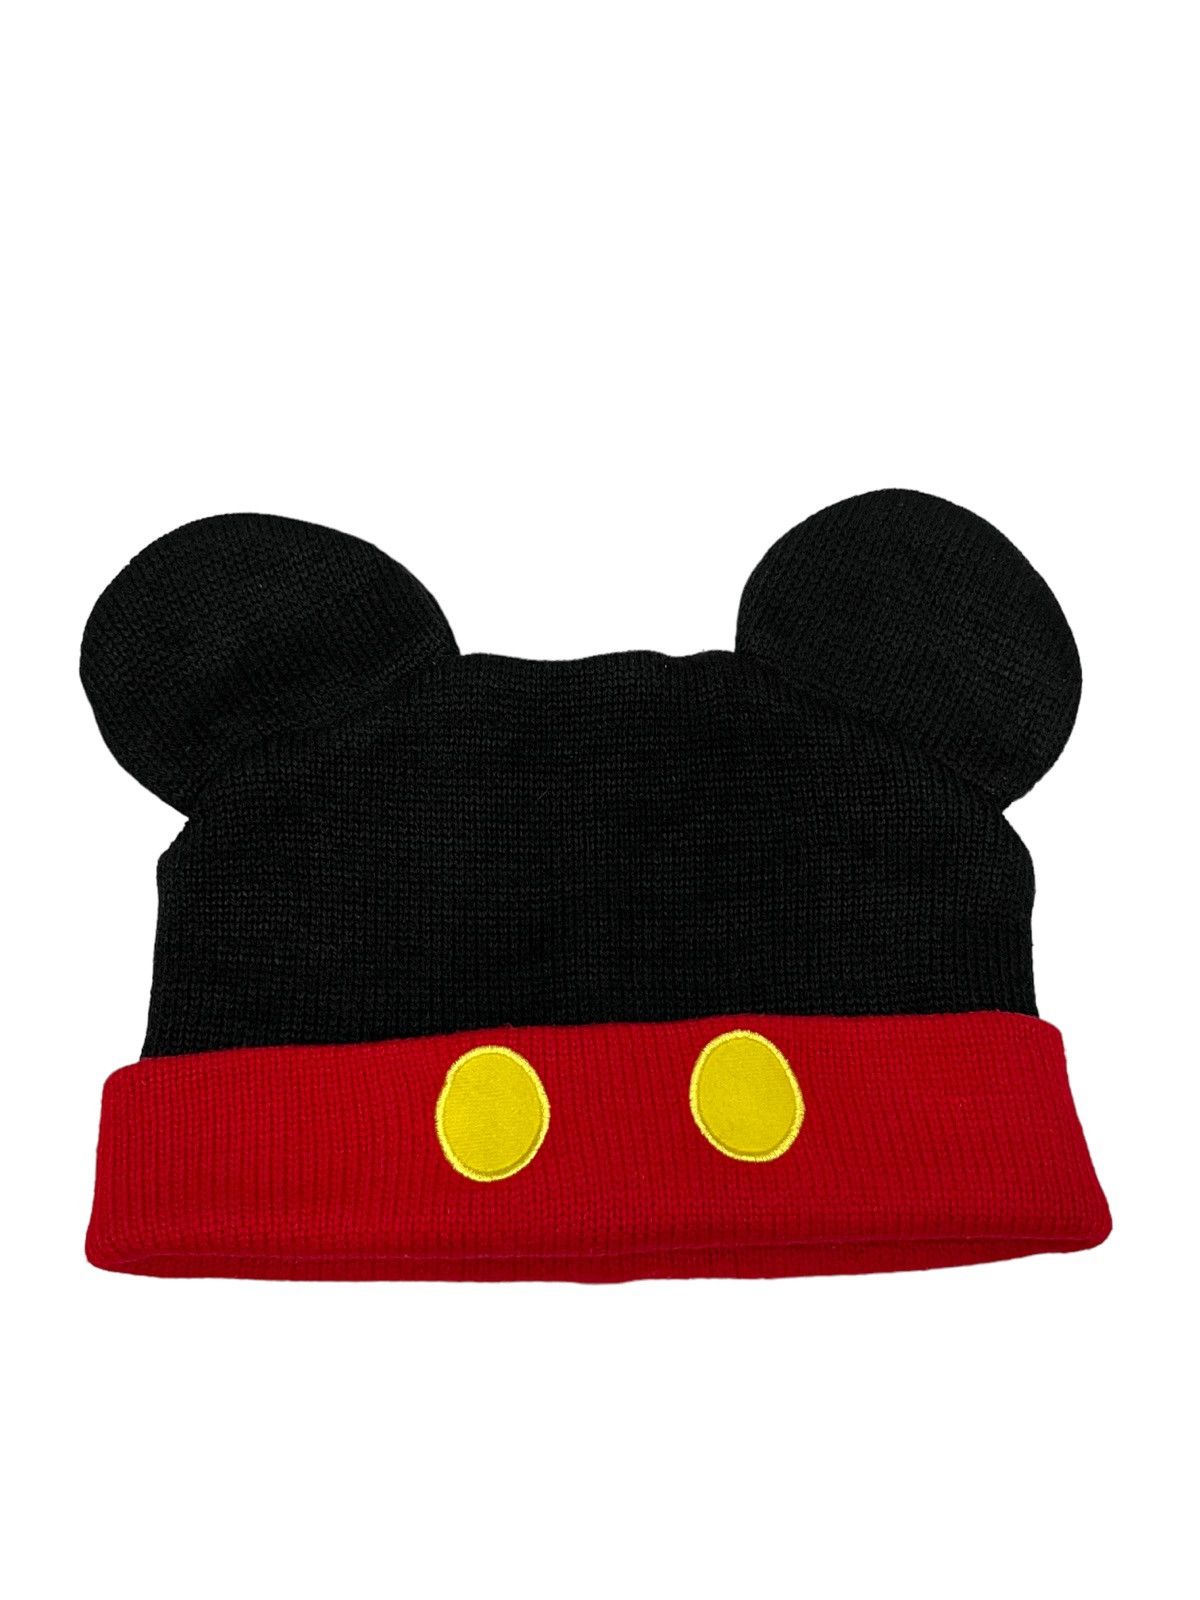 Mickey Mouse TOKYO DISNEY MICKEY MOUSE Acrylic Ear Beanie Hat Size ONE SIZE - 4 Thumbnail